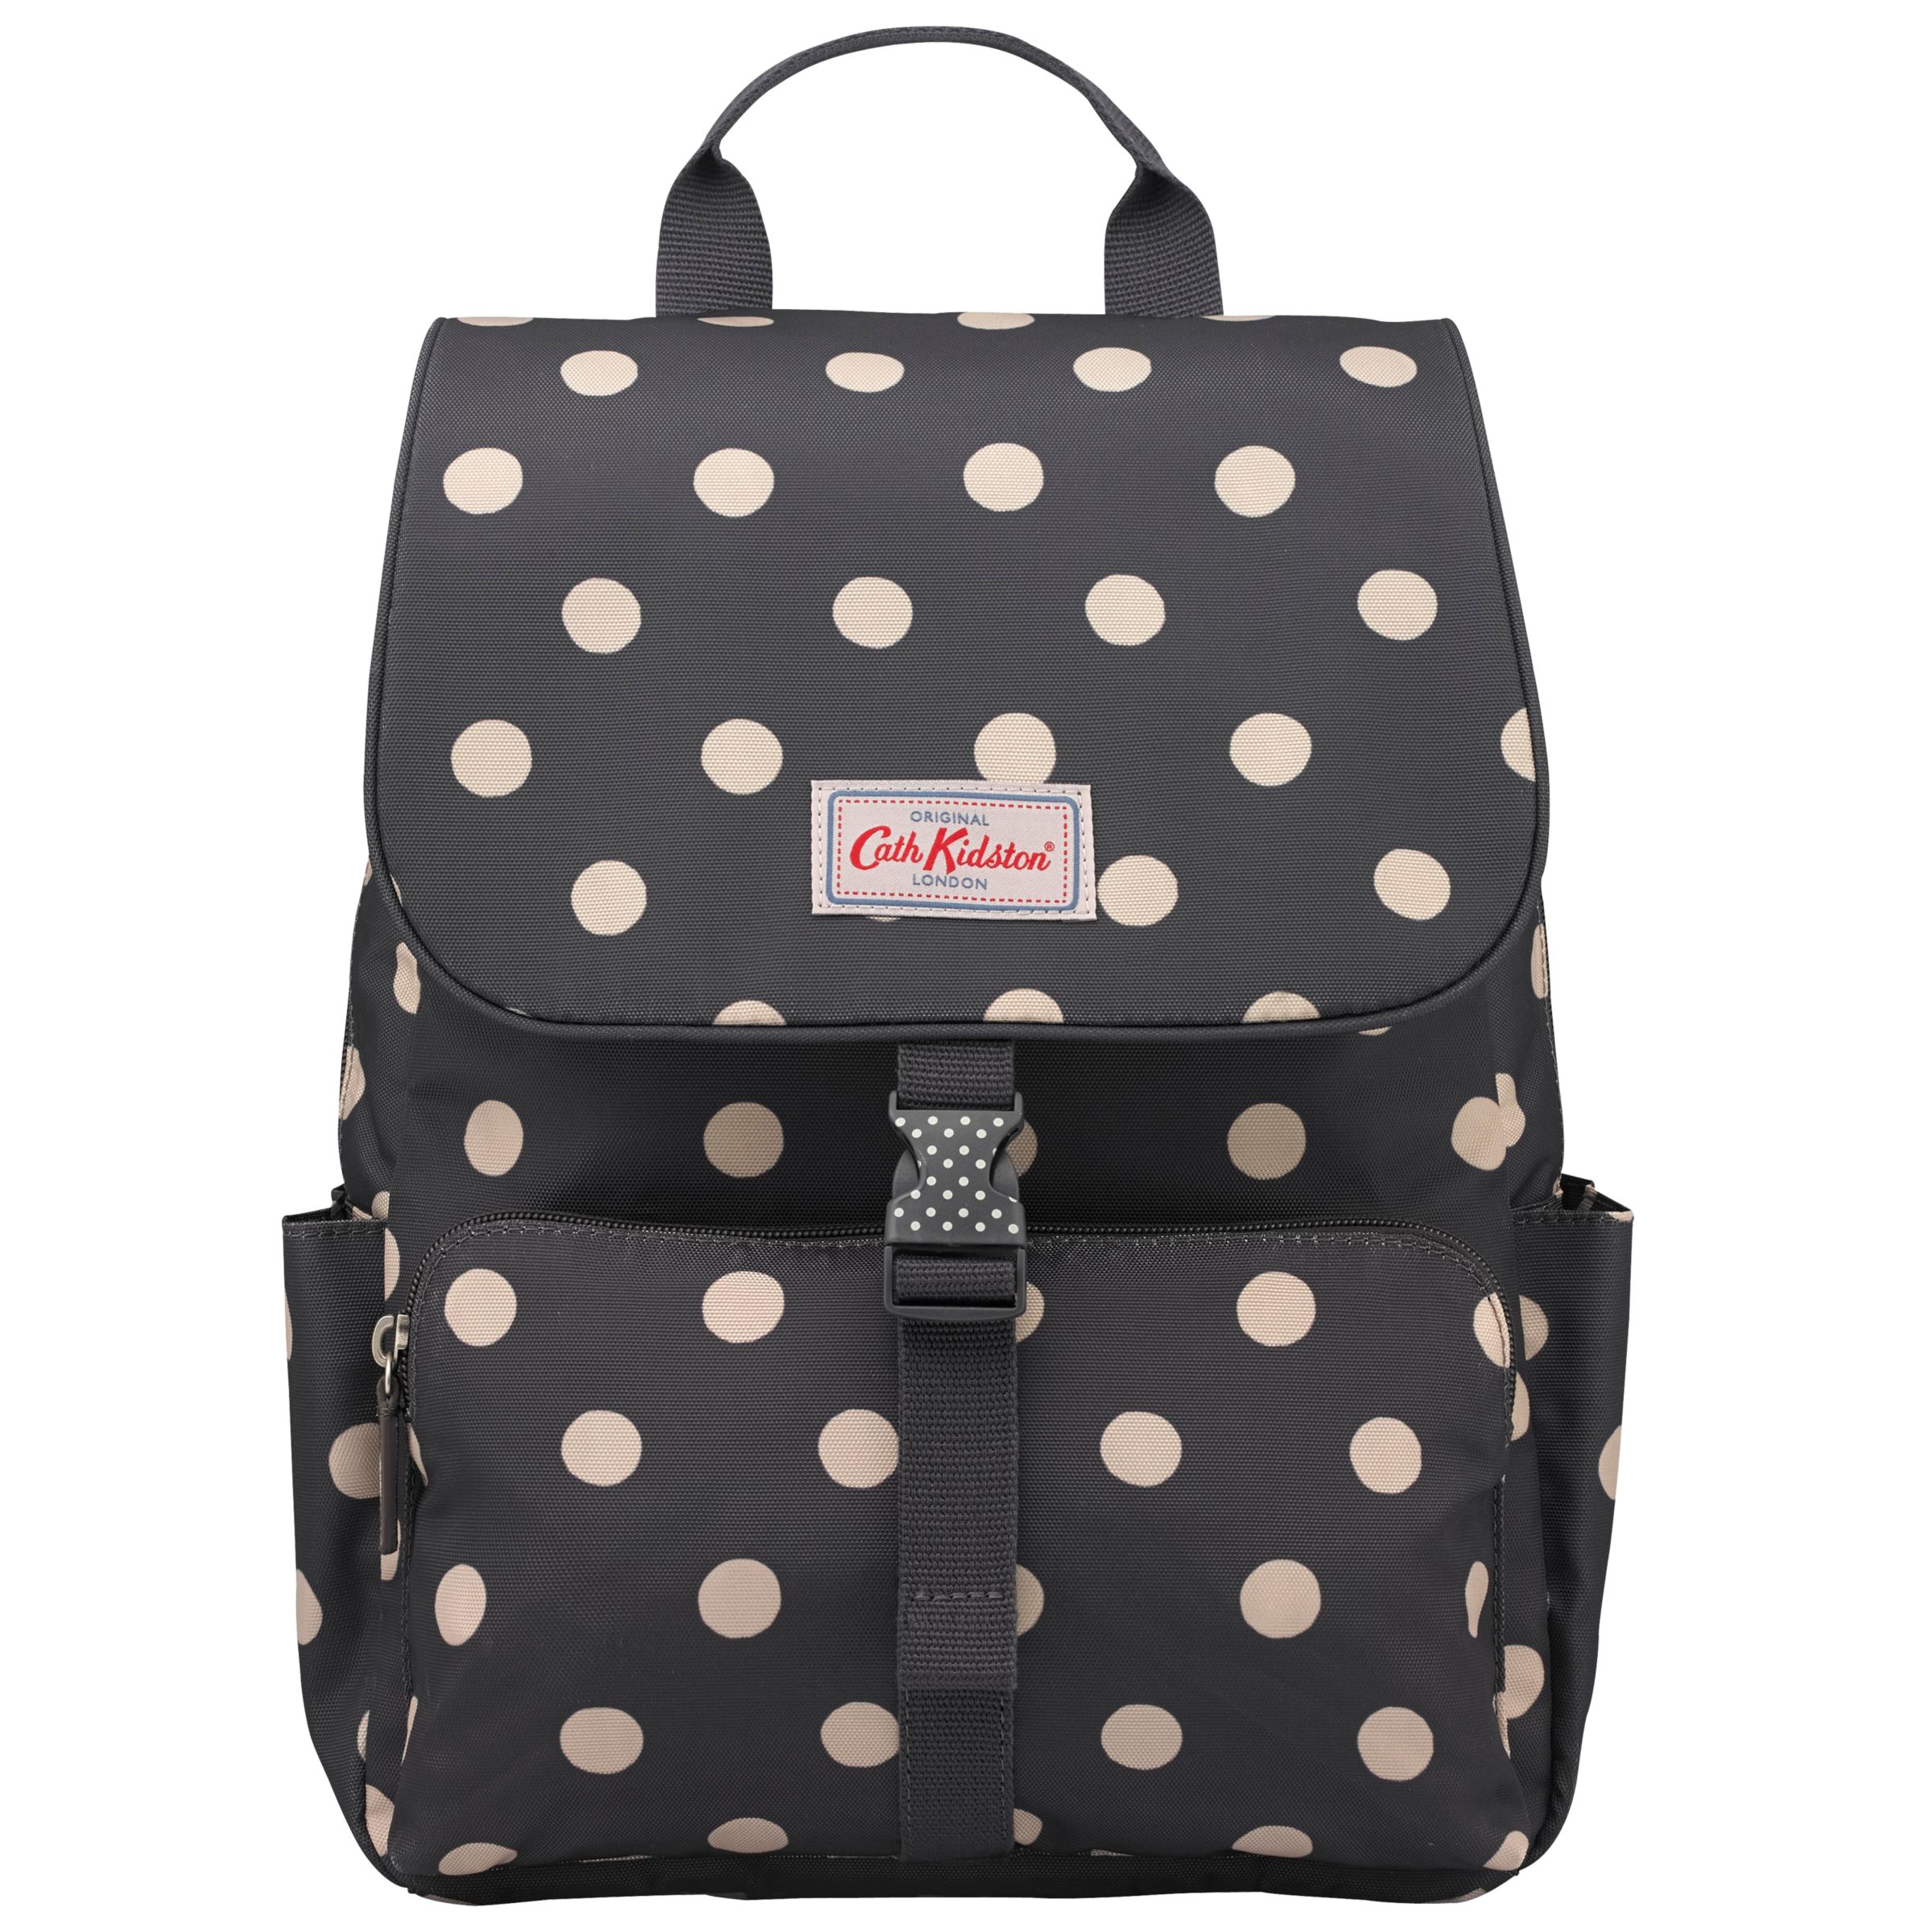 cath kidston buckle backpack review